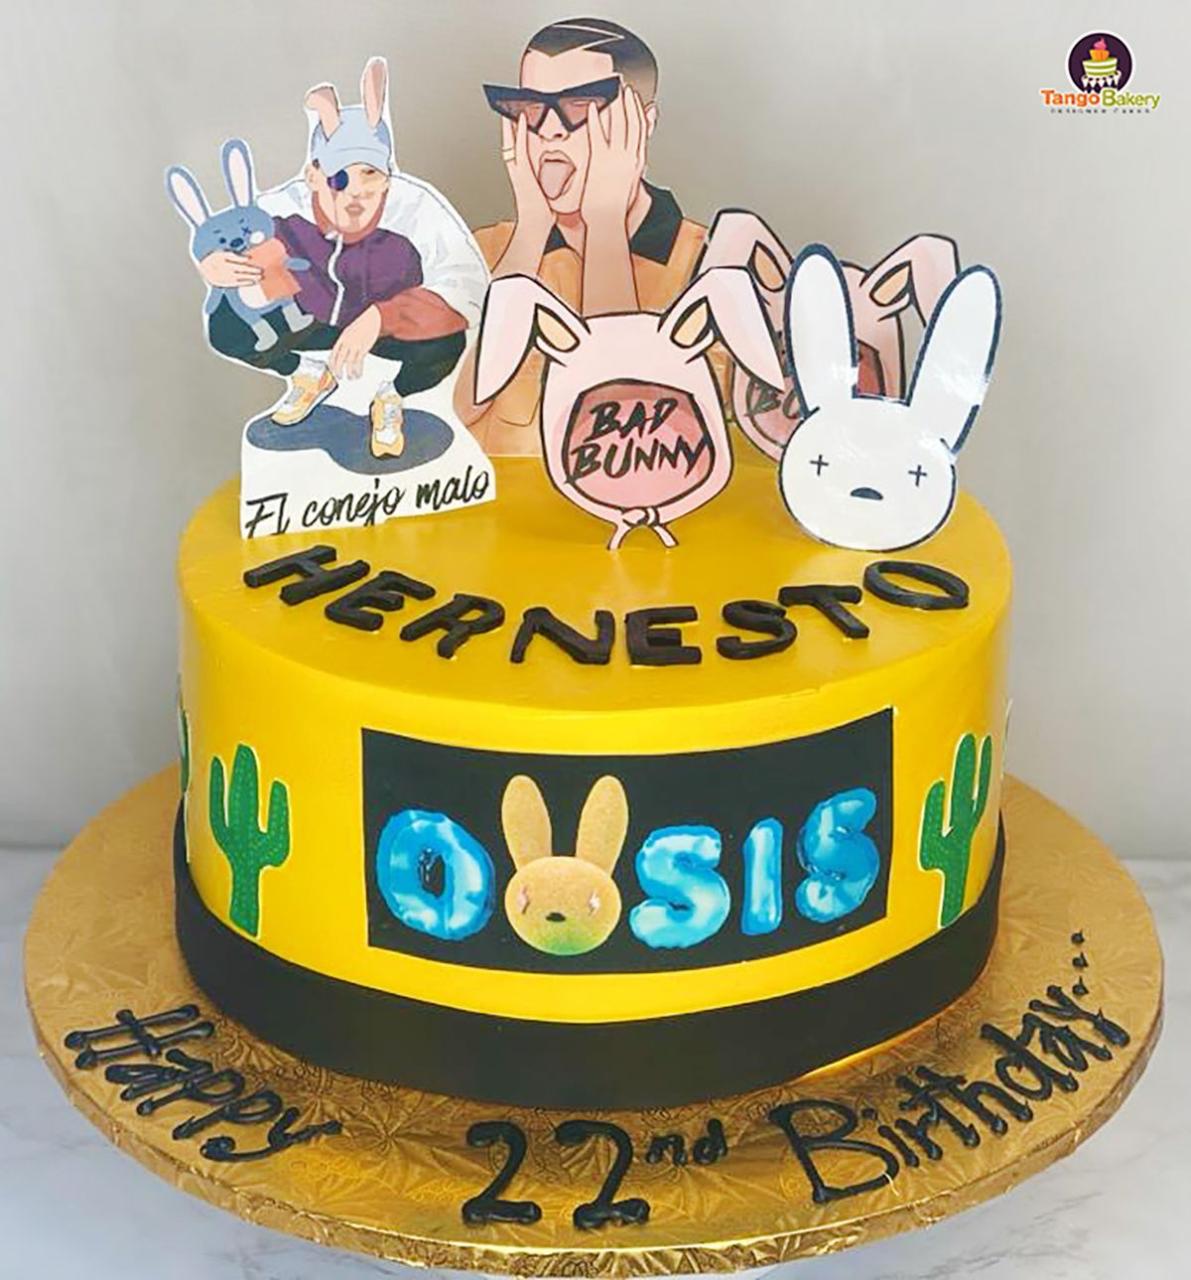 15 Bad Bunny Cake Ideas That Will Make Your Next Party a Hit